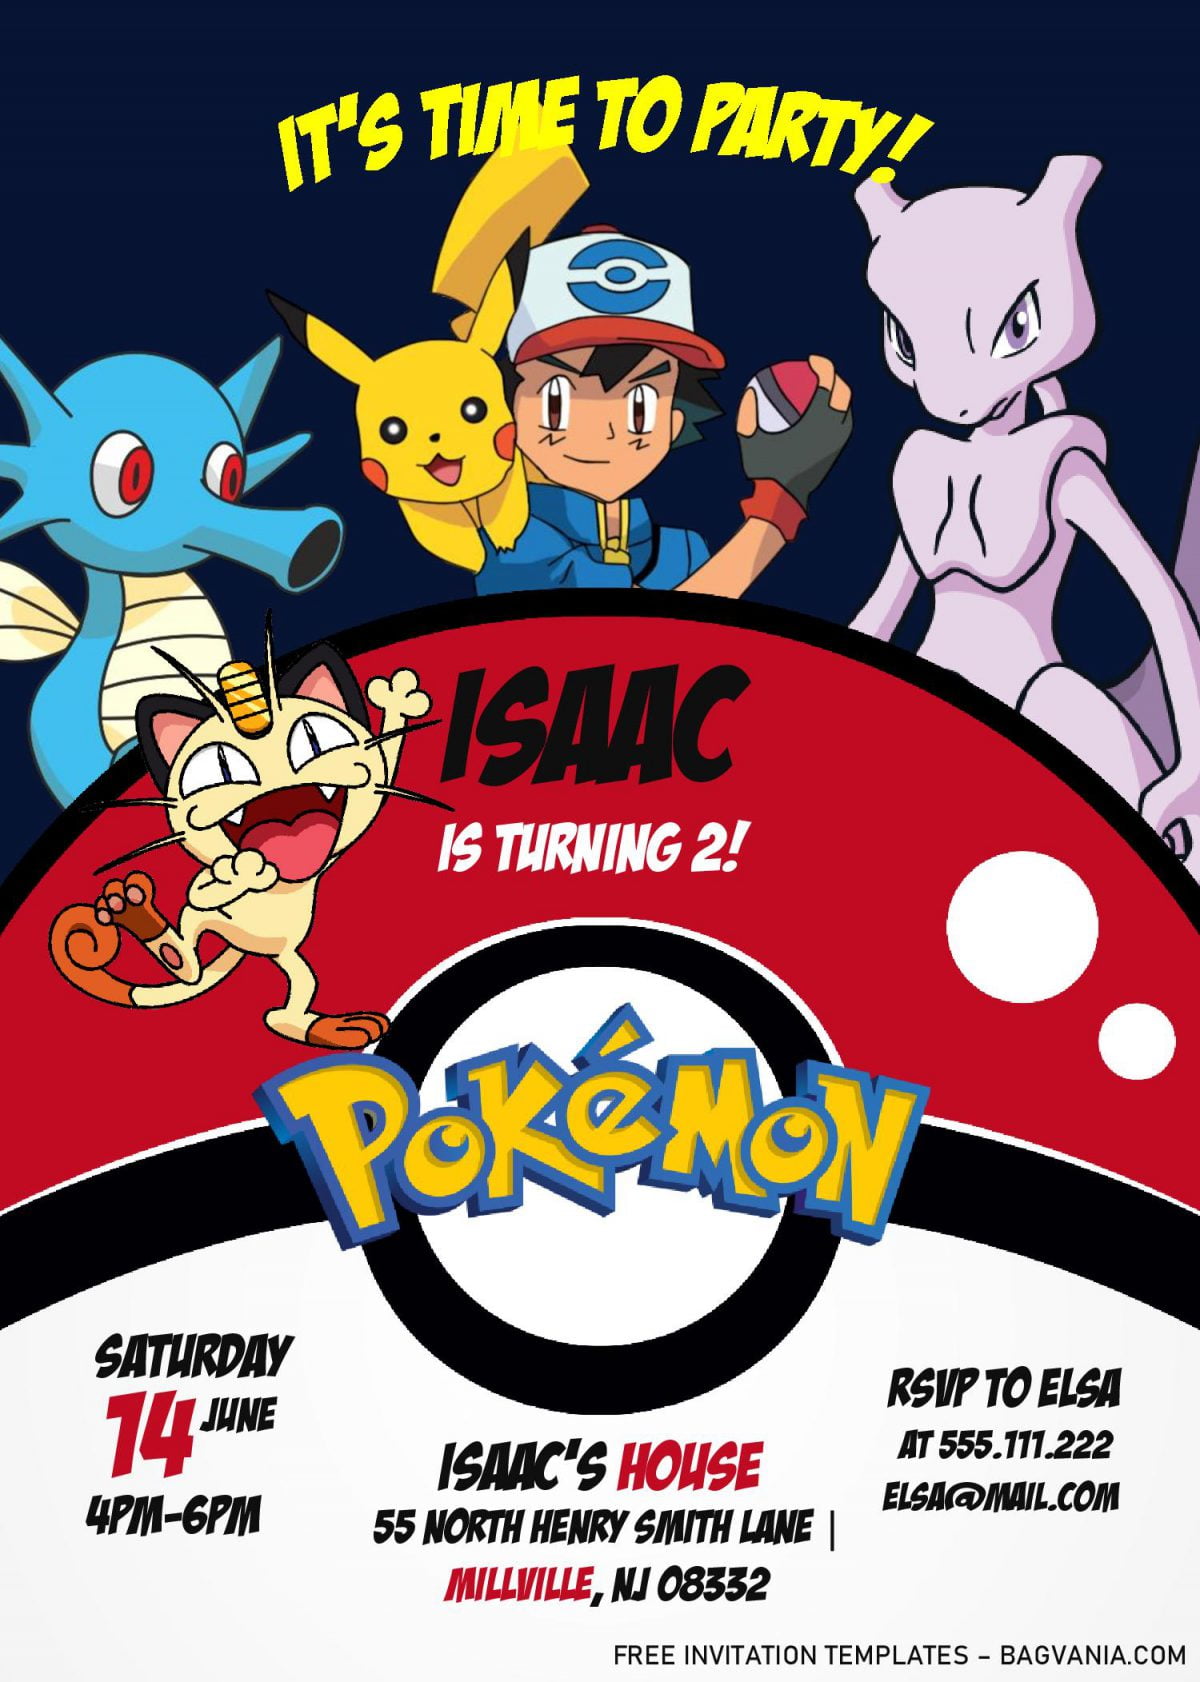 Pokemon Invitation Templates - Editable With MS Word and has meowth and meotwo